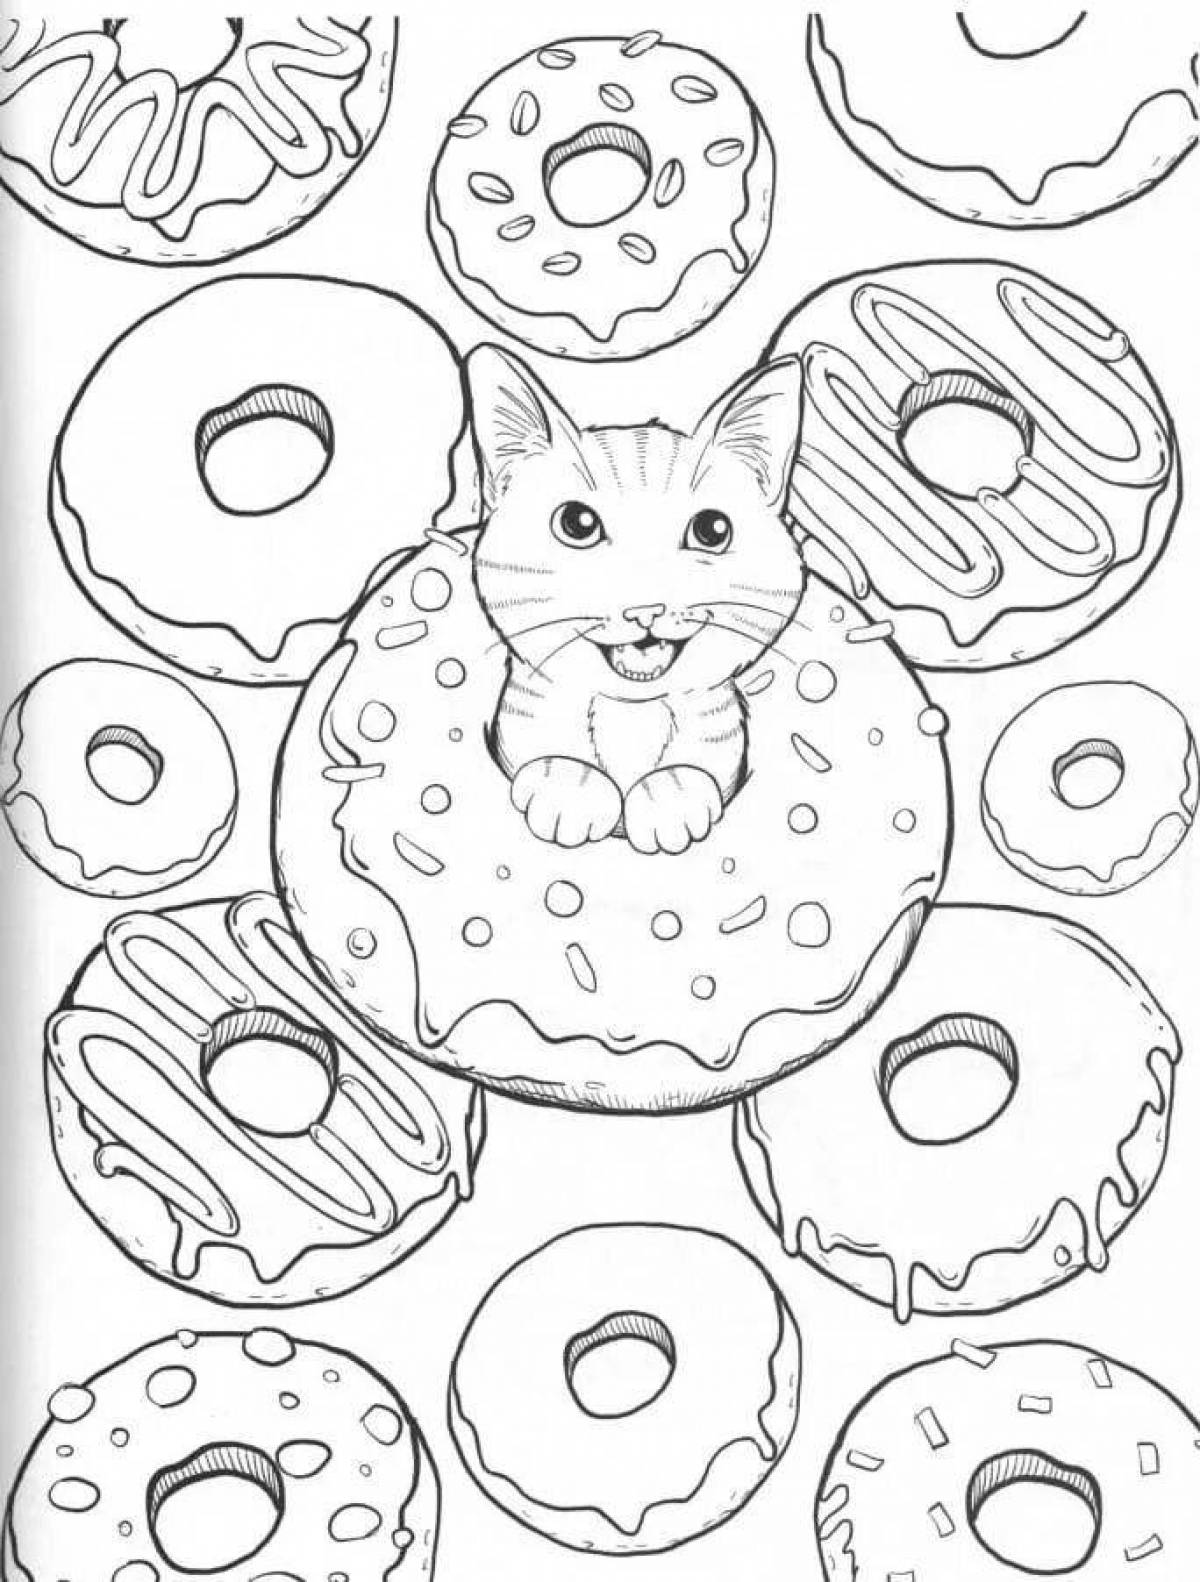 Glamorous donut cat coloring page